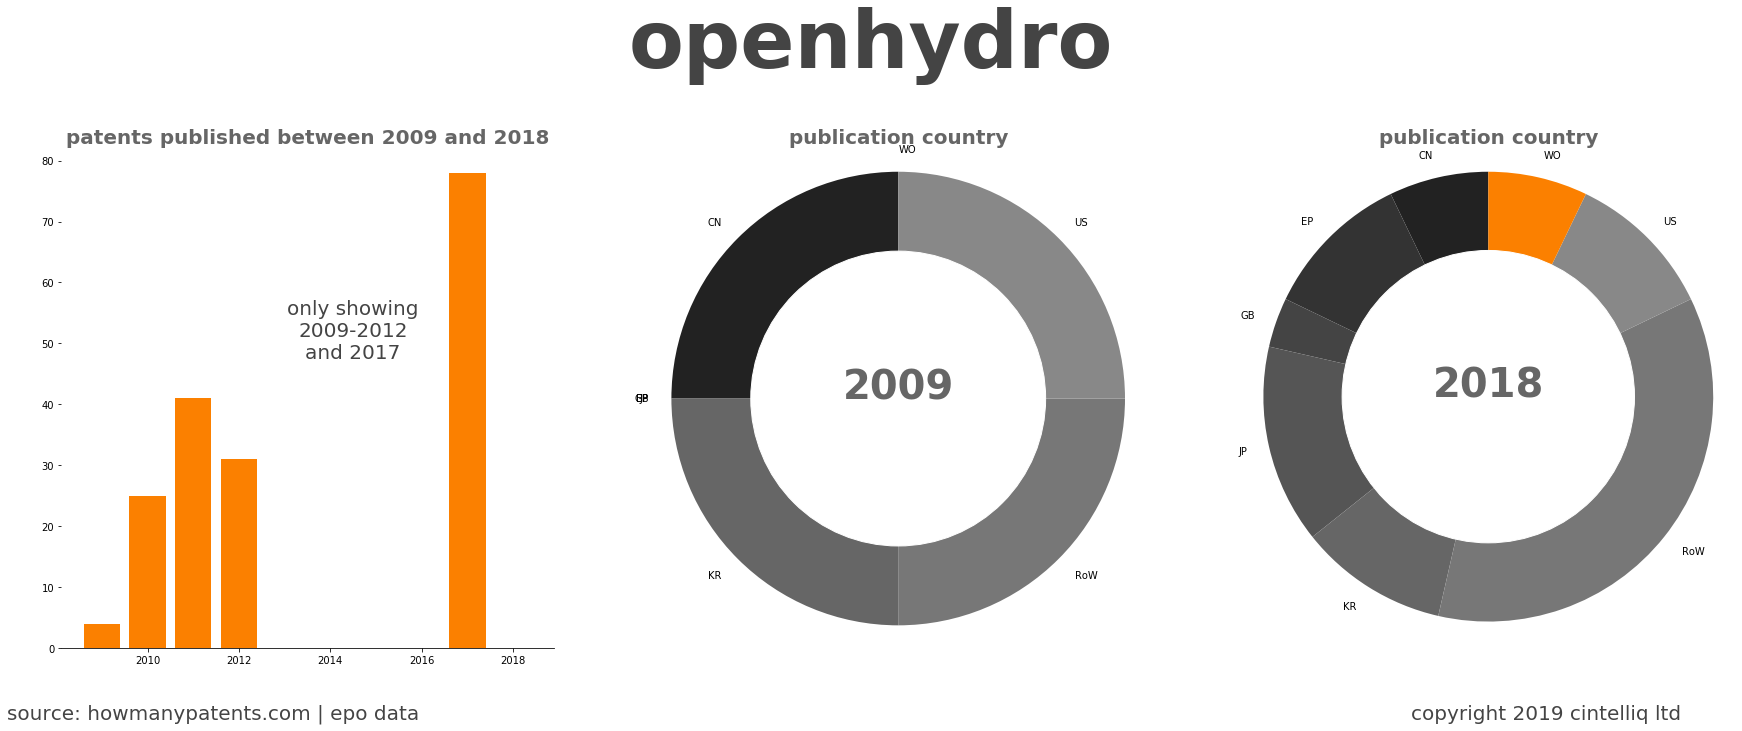 summary of patents for Openhydro